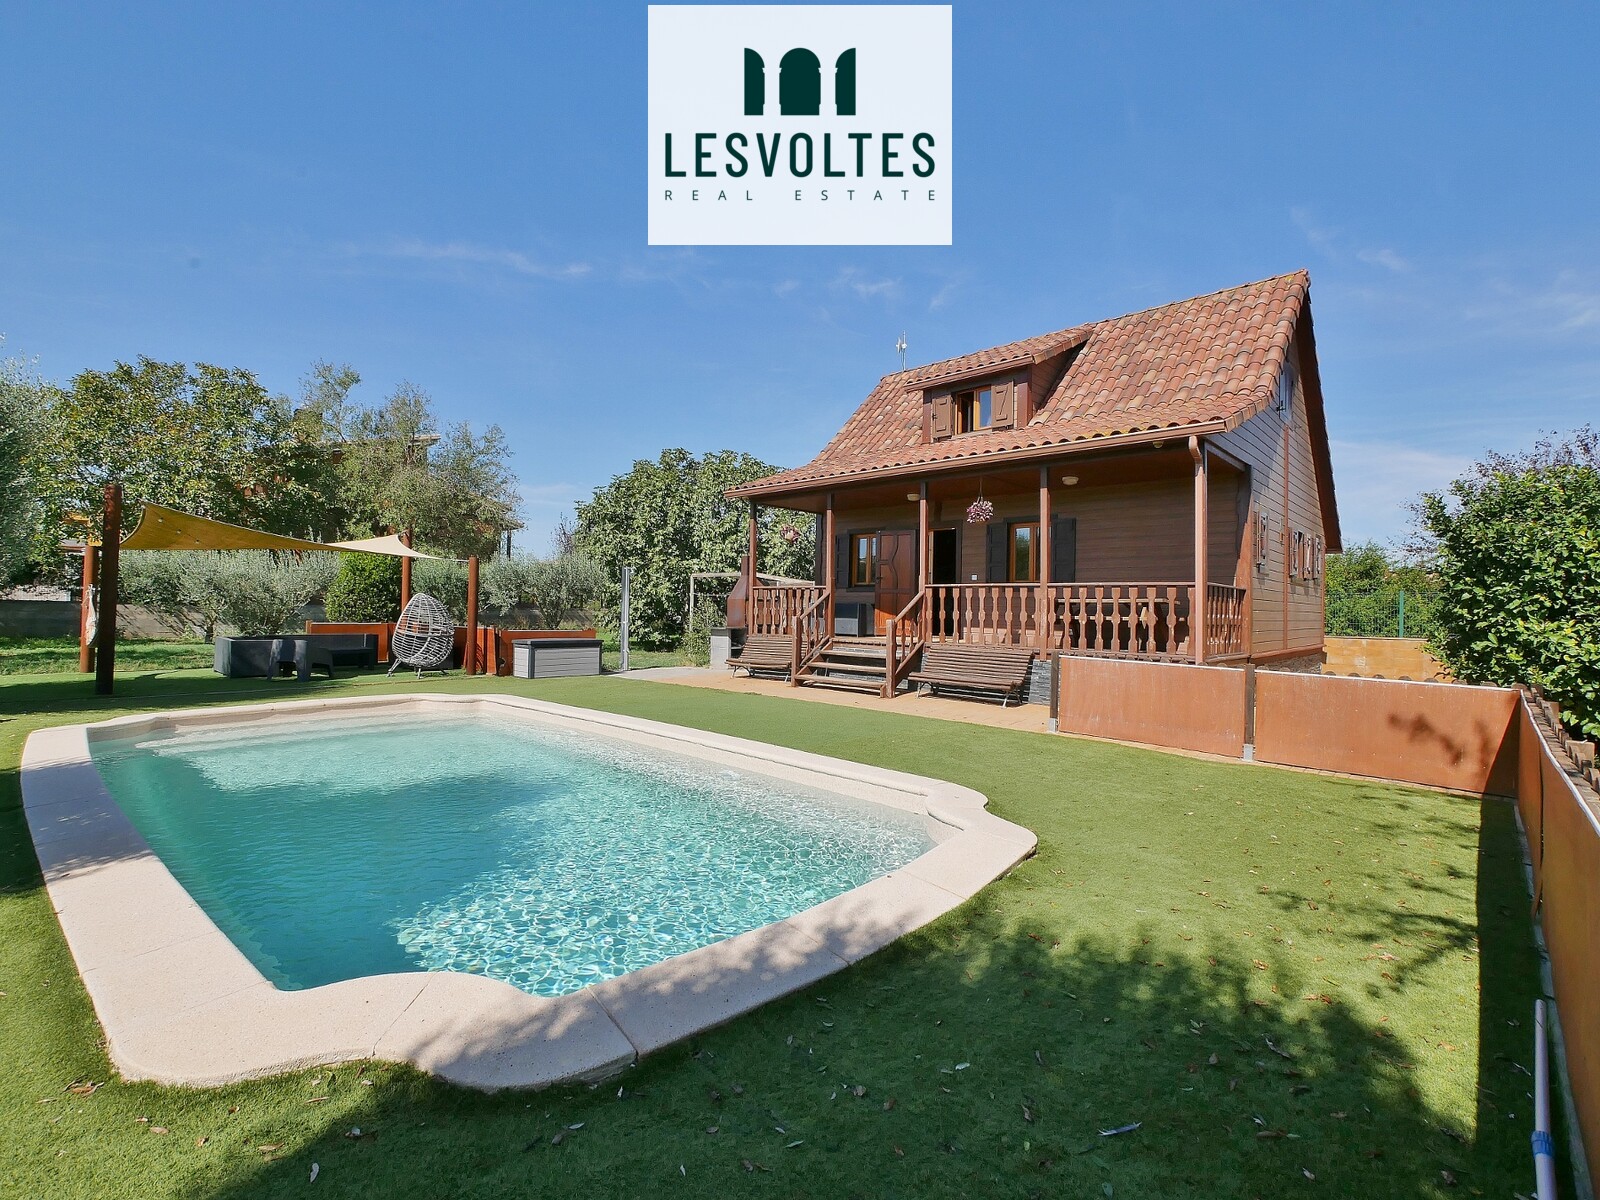 SPLENDID AND UNIQUE FARM WITH 1.380 M2 OF LAND AND A 125 M2 WOODEN HOUSE, FOR SALE IN THE BAIX EMPORDÀ.